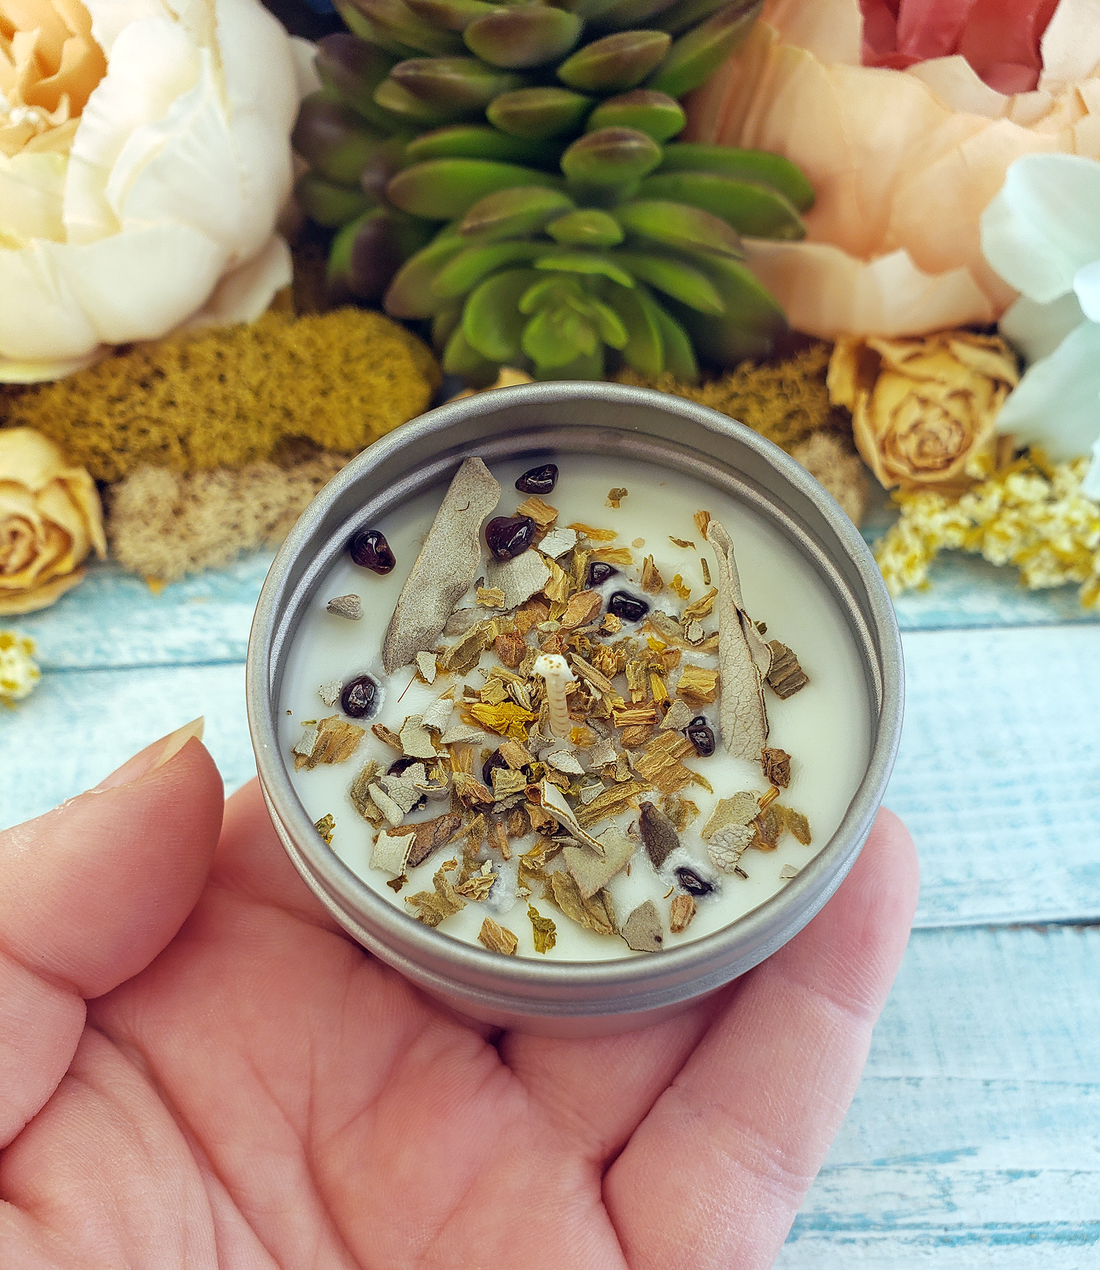 Motivation - 2oz Coconut Soy Wax Handmade Scented Candle - Grapefruit and Ginger Essential Oils Scented - Decorated with Garnet Crystal Chips and Dried Herbs White Sage